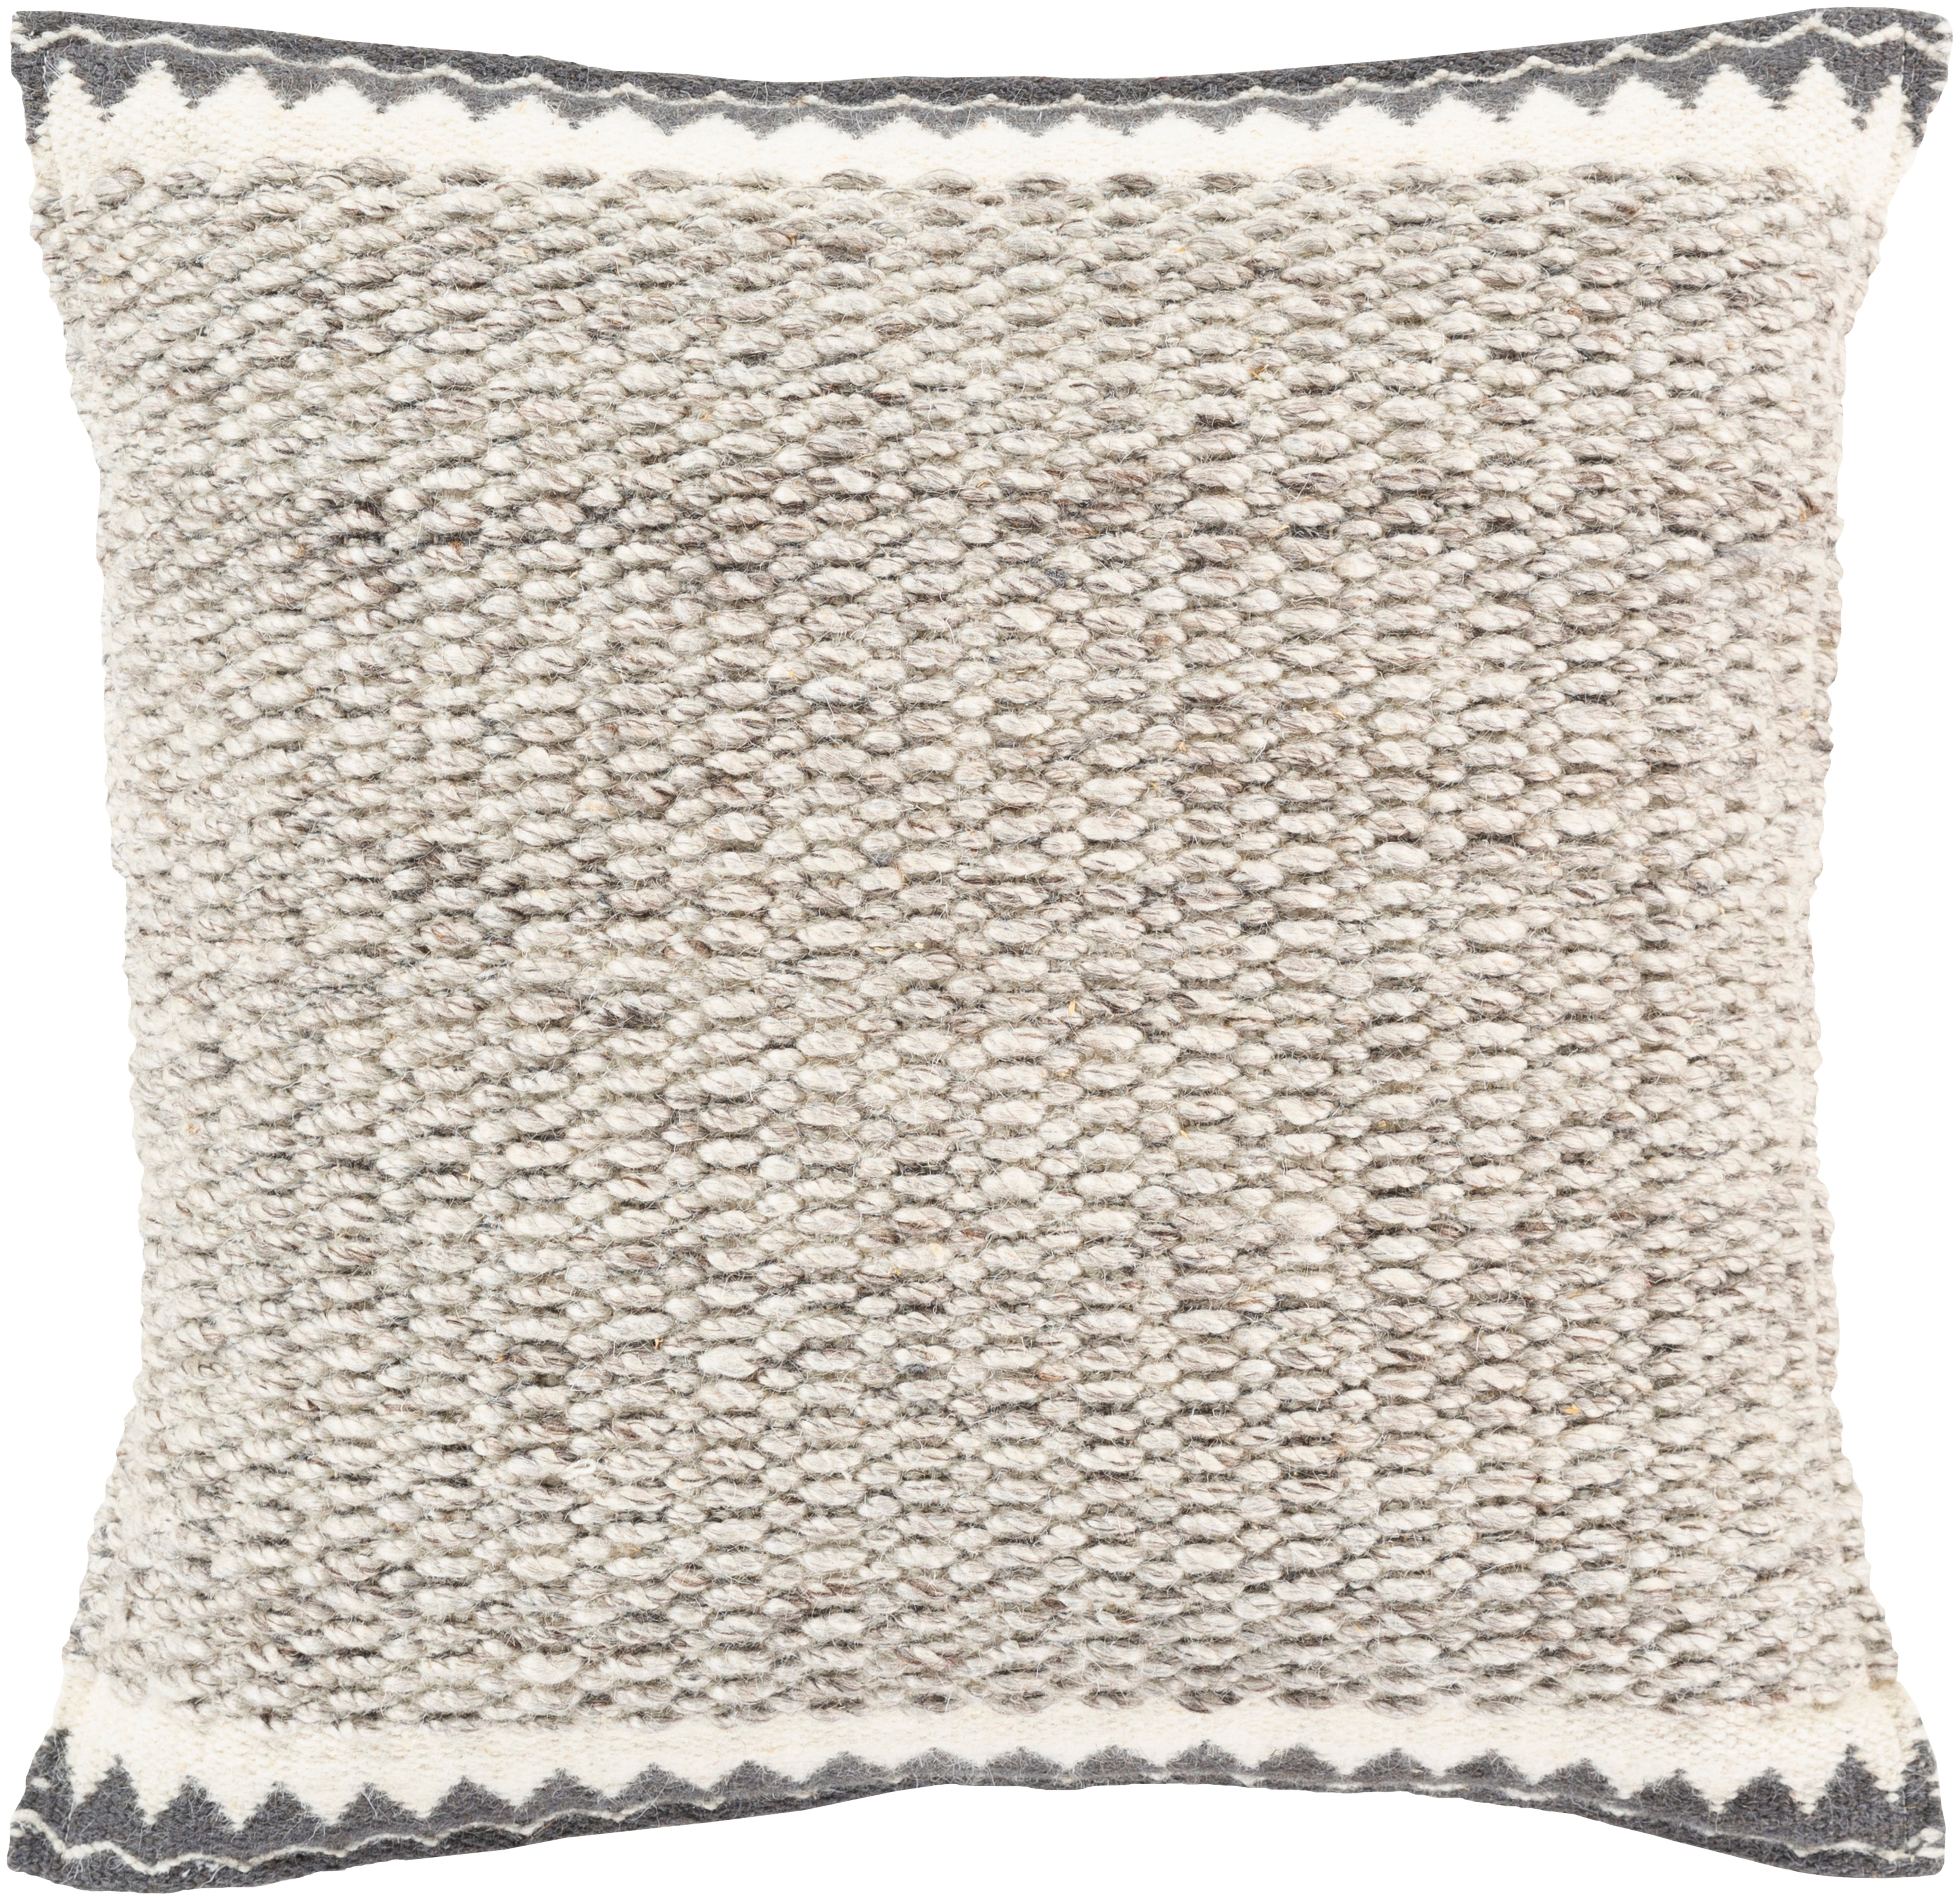 Faroe, 22" Pillow with Poly Insert - Surya